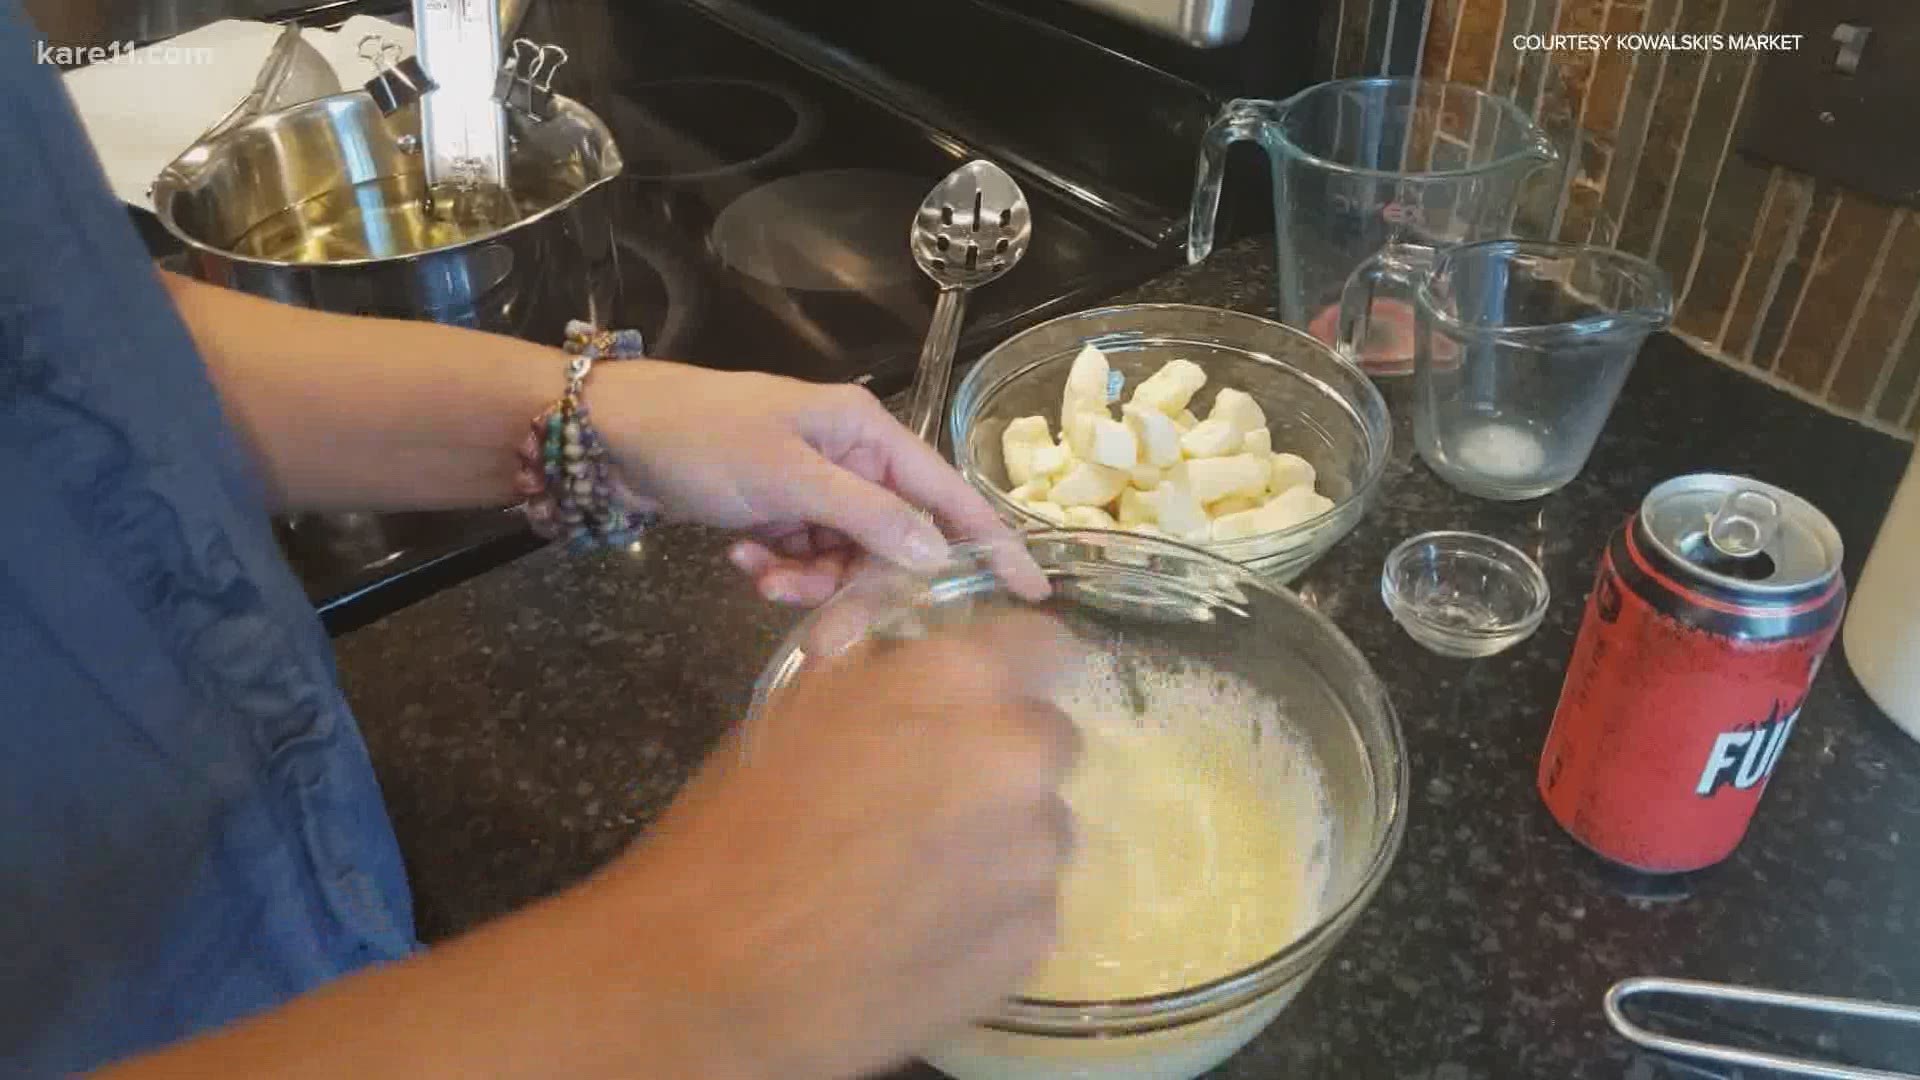 Missing those state fair delicacies? Make them at home!